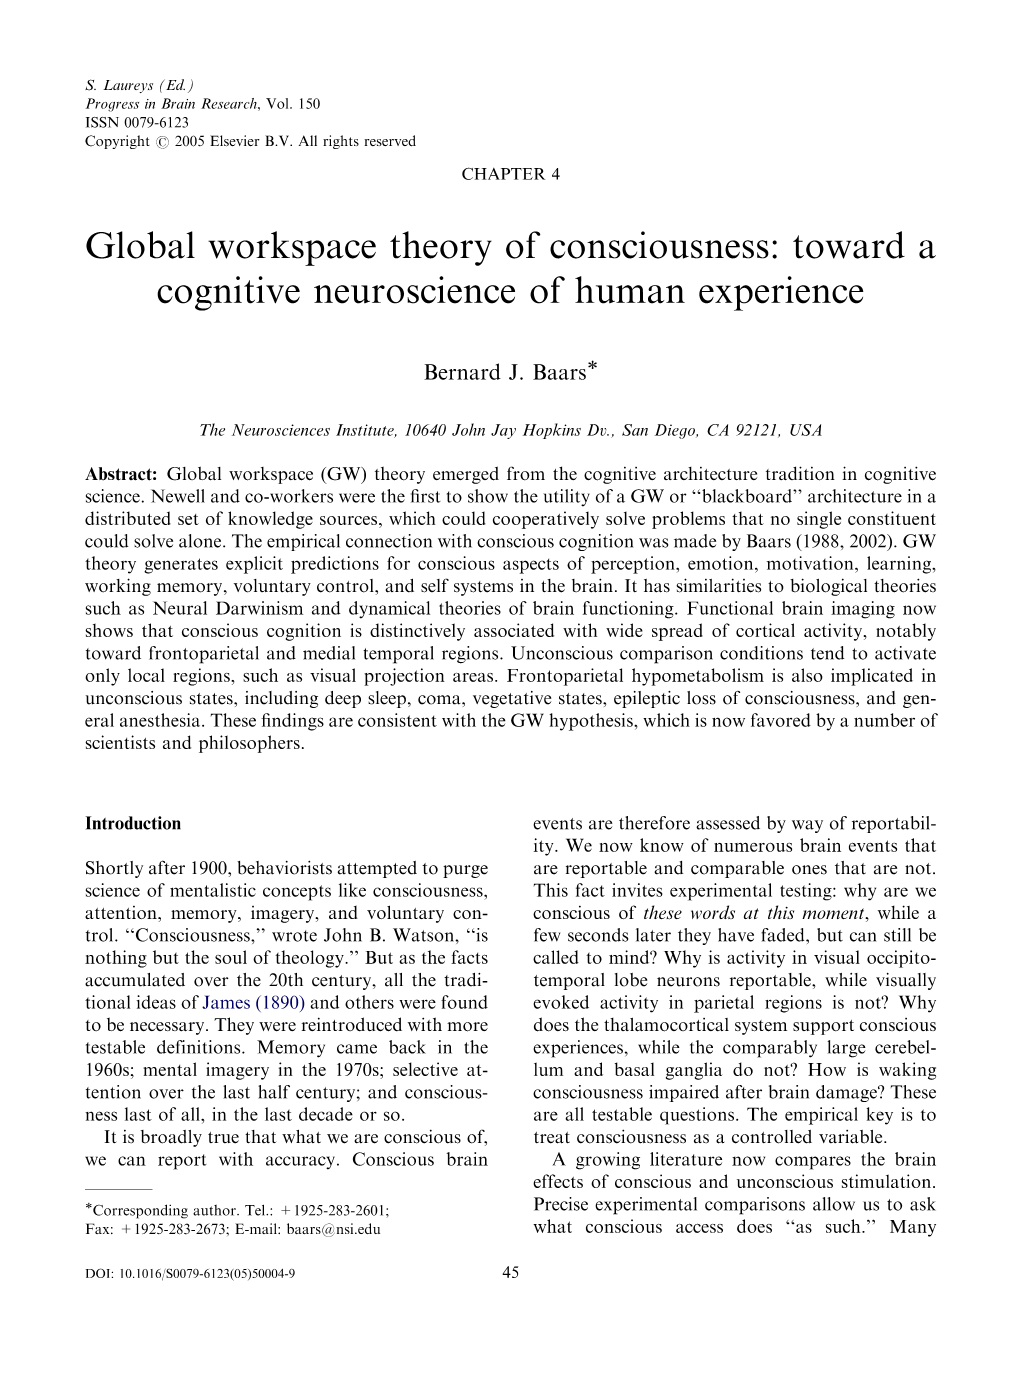 Global Workspace Theory of Consciousness: Toward a Cognitive Neuroscience of Human Experience